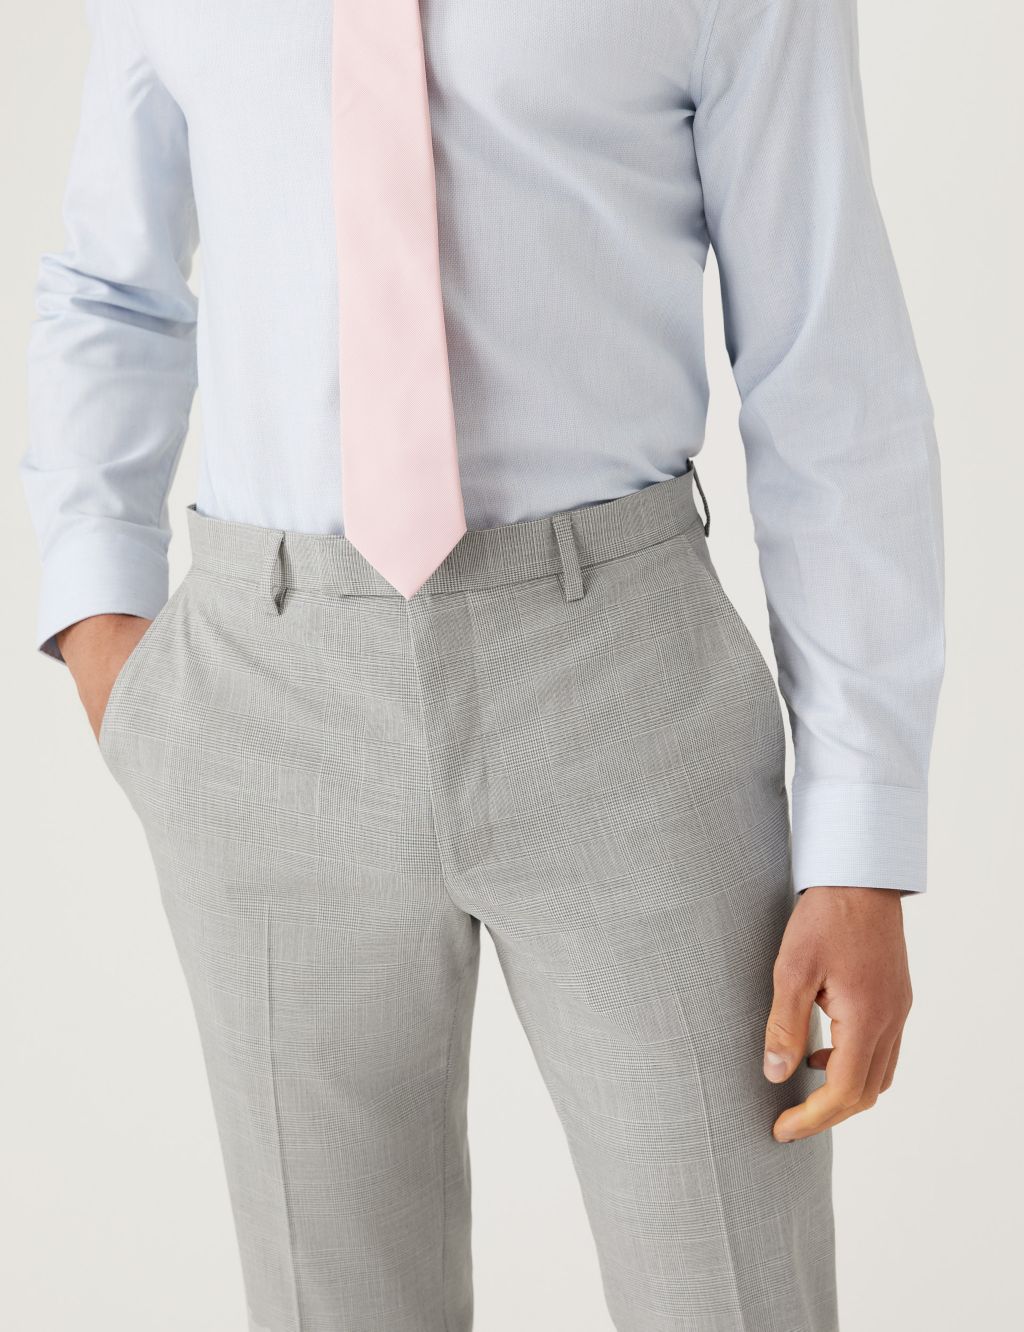 Slim Fit Prince of Wales Check Suit Trousers image 2